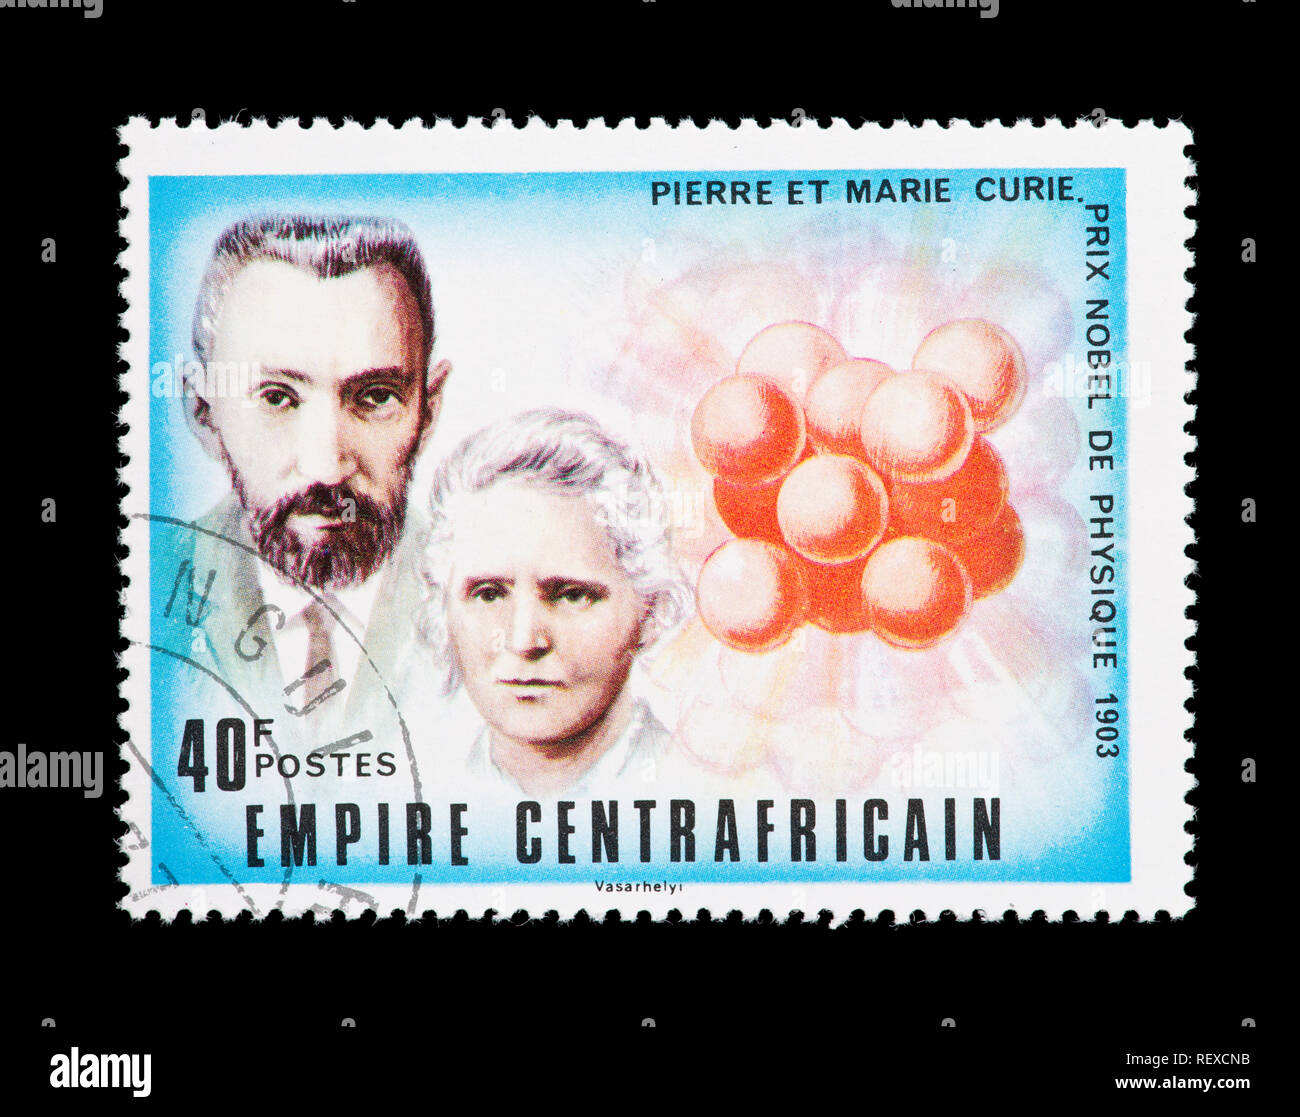 Postage stamp from the Central African Republic depicting Pierre and Marie Curie, discover of radioactivity. Stock Photo